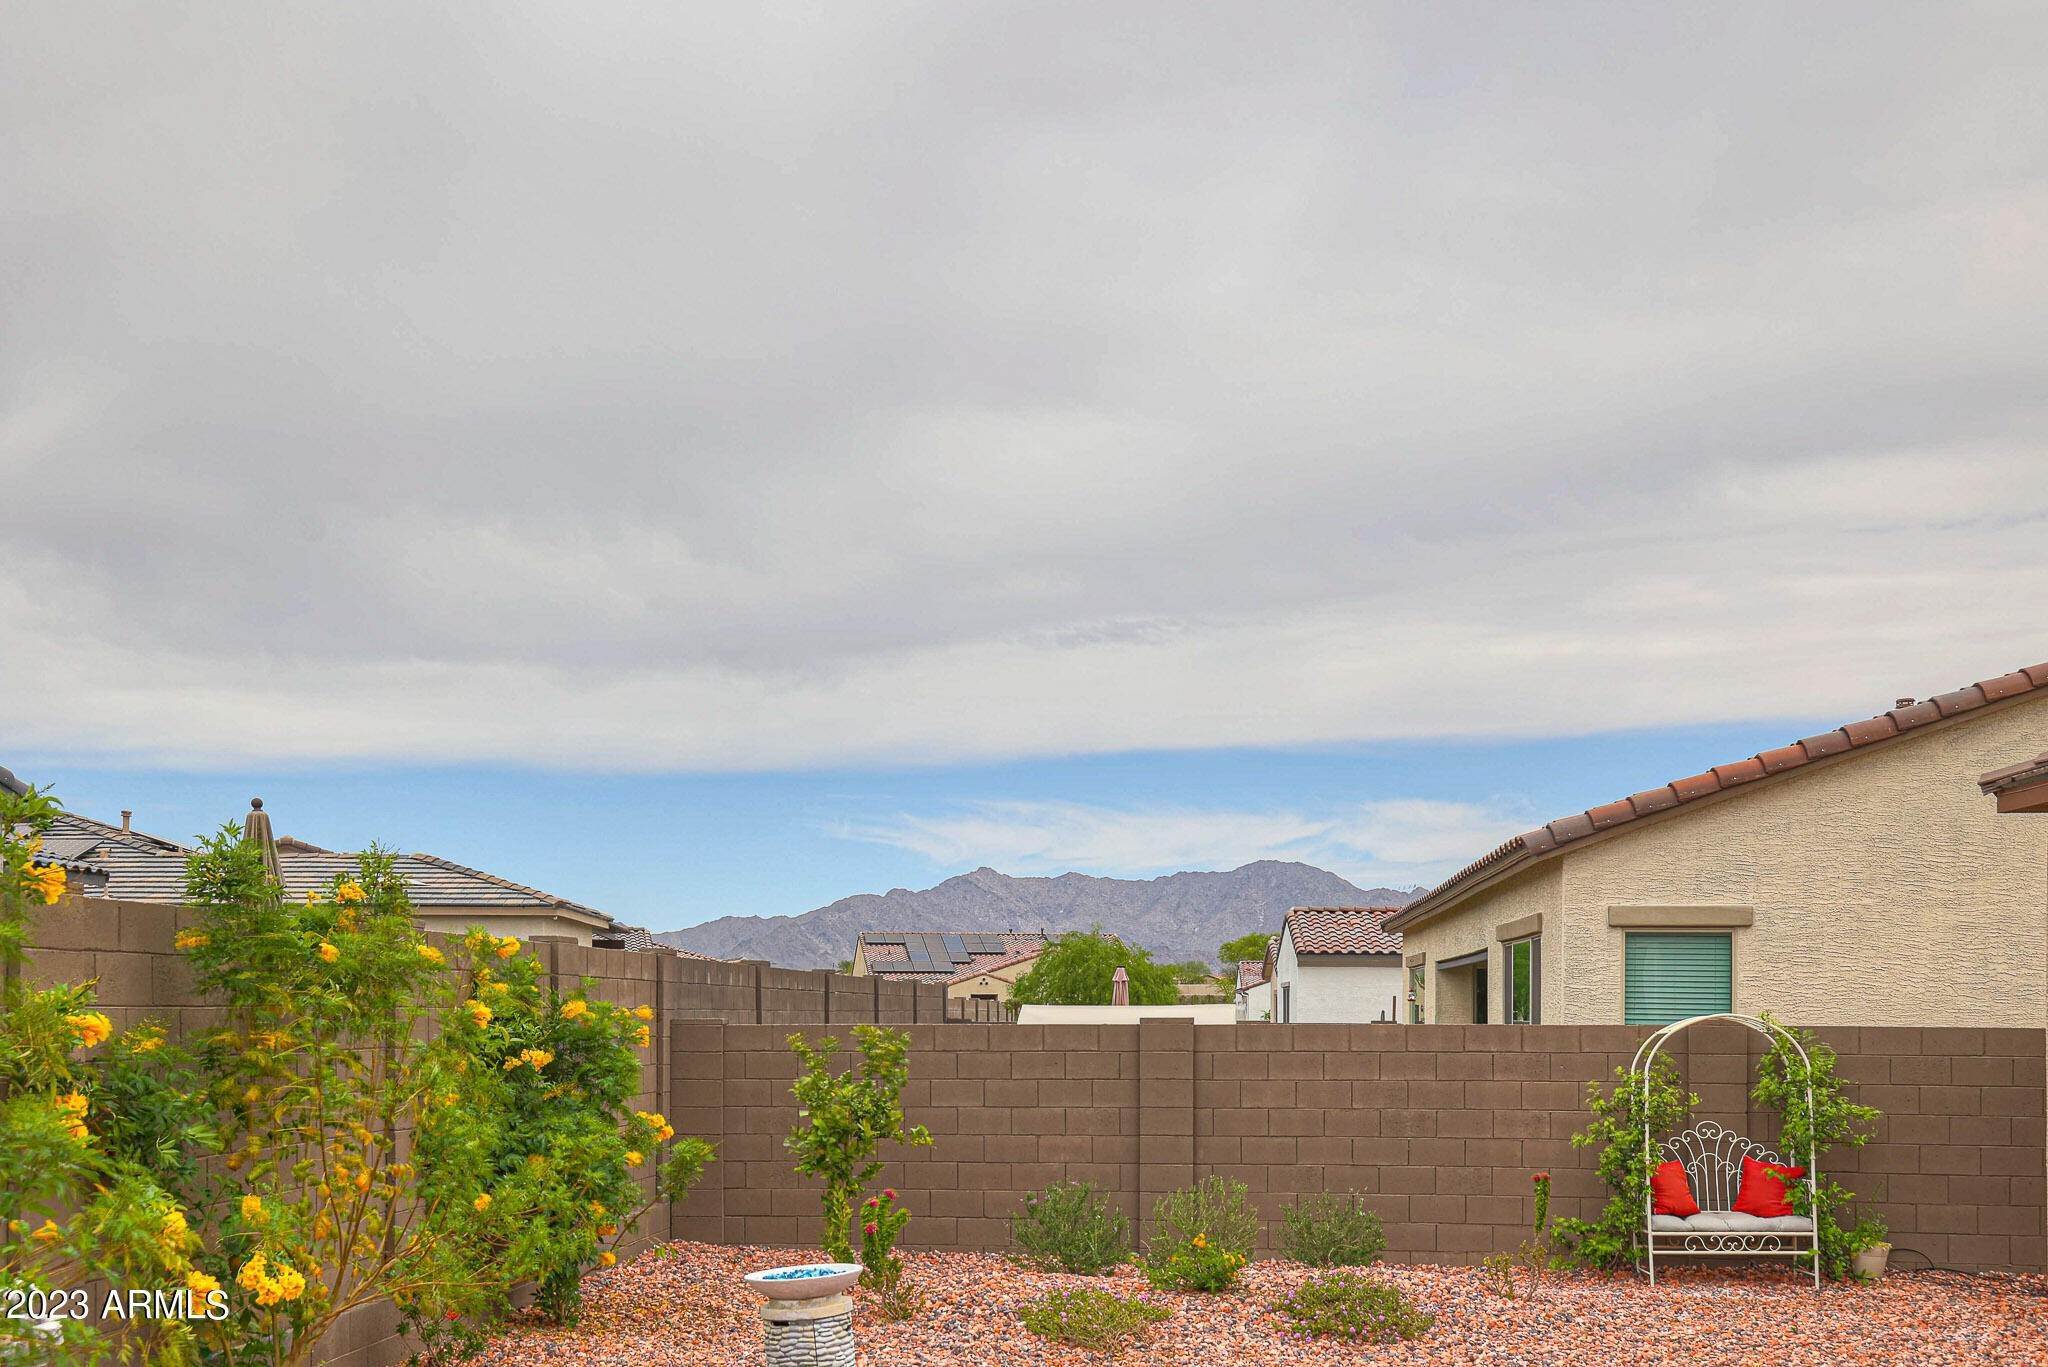 38. Single Family for Sale at Goodyear, AZ 85338